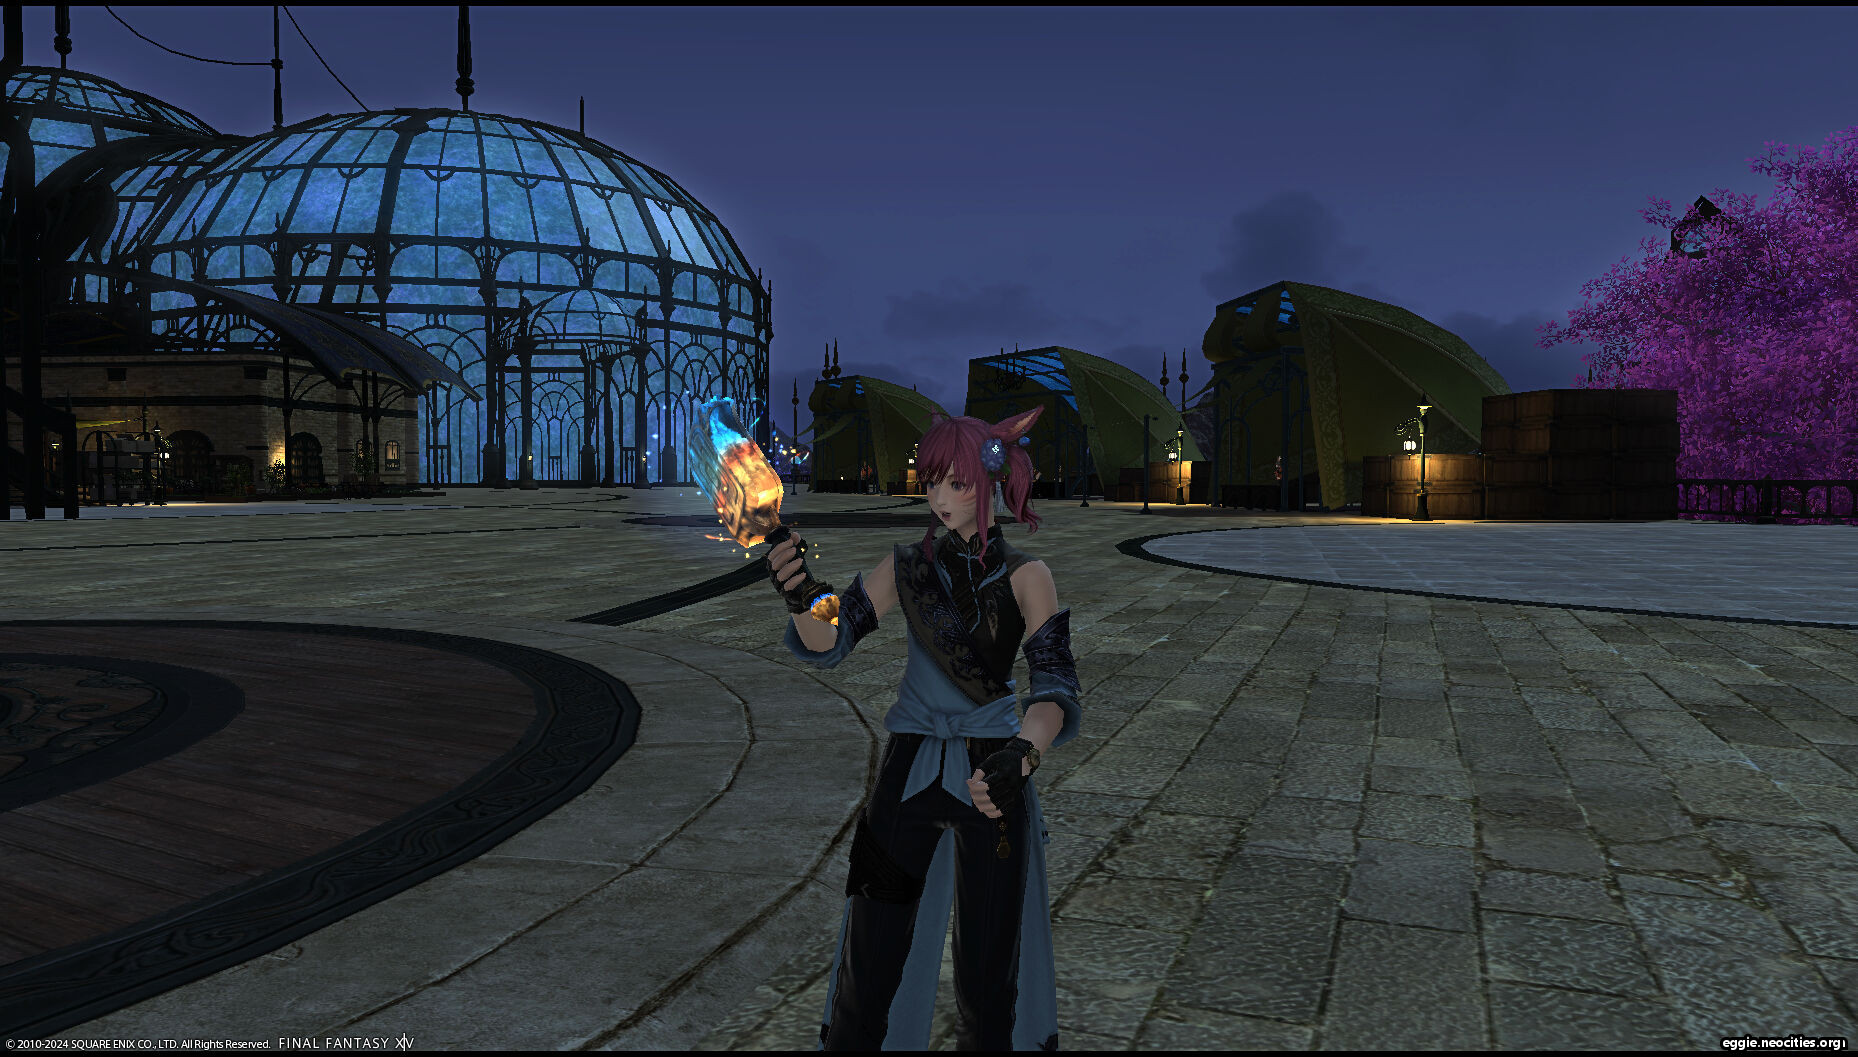 Zel holding the Lodestar Frypan. It is very shiny.